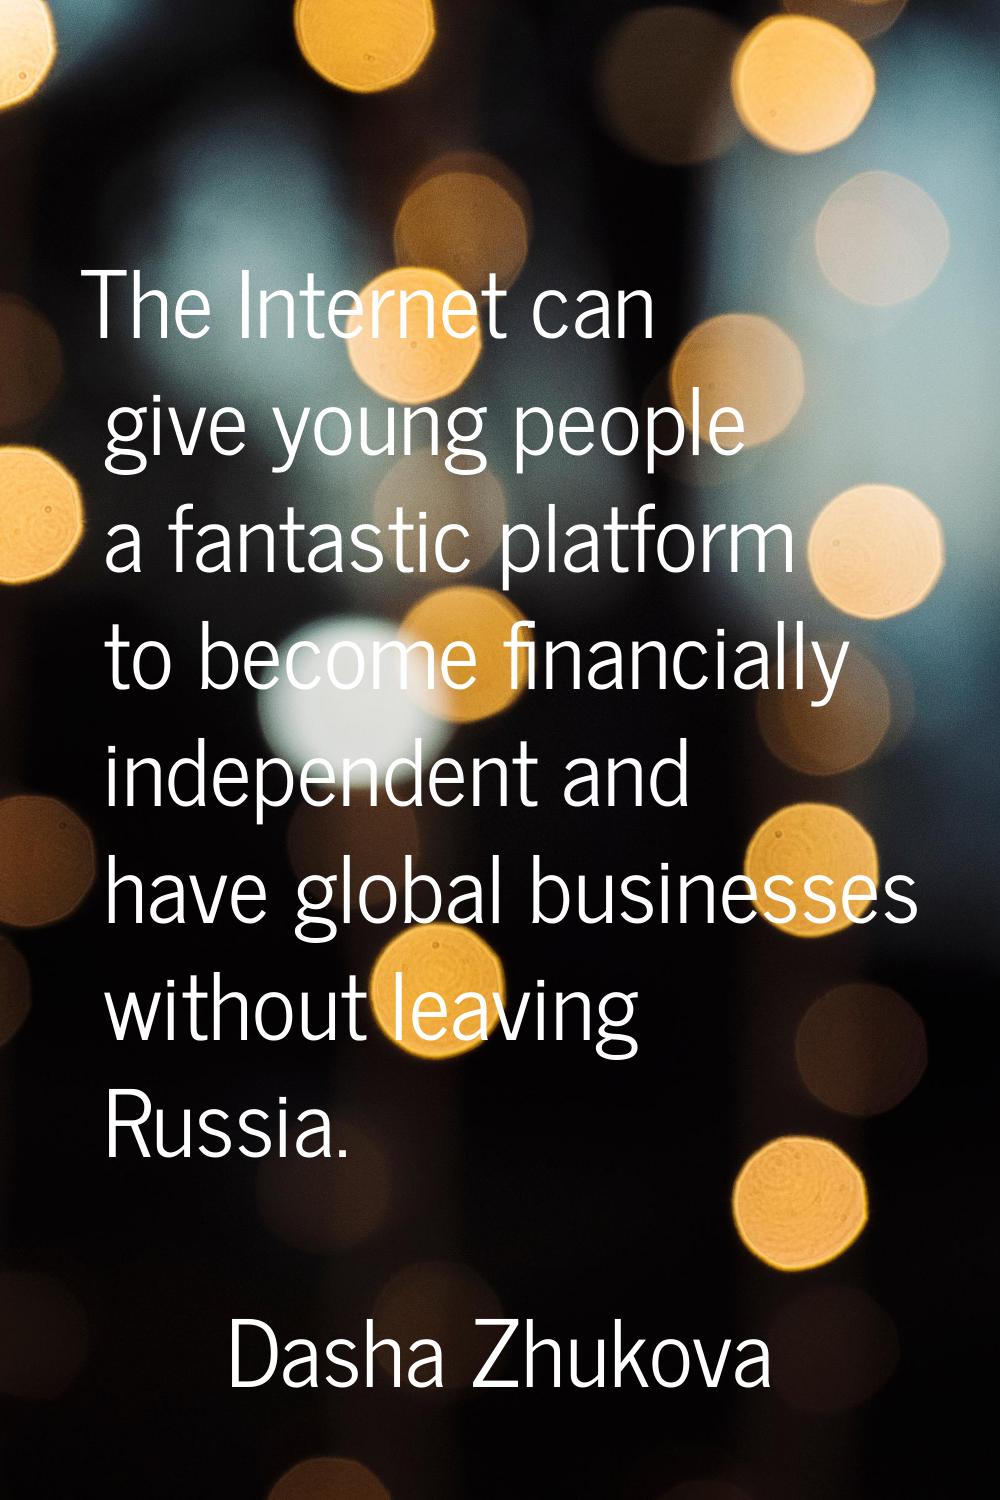 The Internet can give young people a fantastic platform to become financially independent and have 